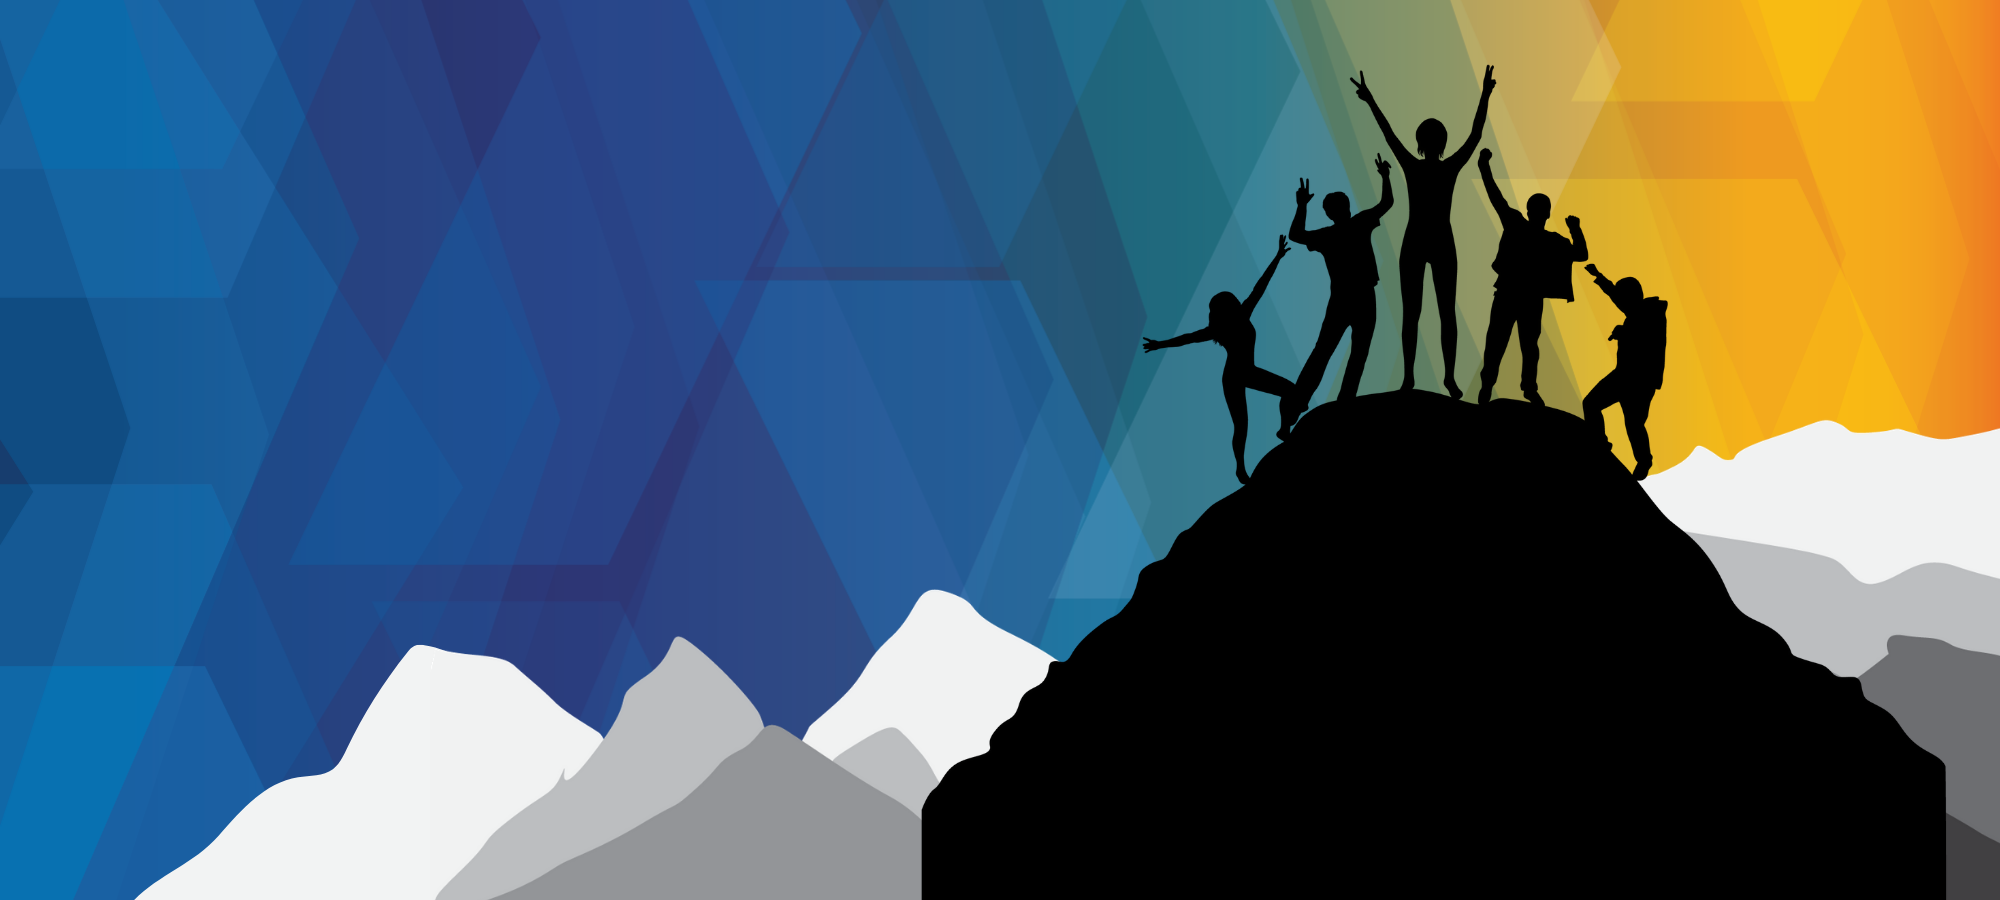 Banner image for the Guiding Principles event. There is a blue to yellow gradient in the background, with graphic people standing on a mountain in the foreground. The people are in celebratory poses, such as holding up their arms and using the peace sign.